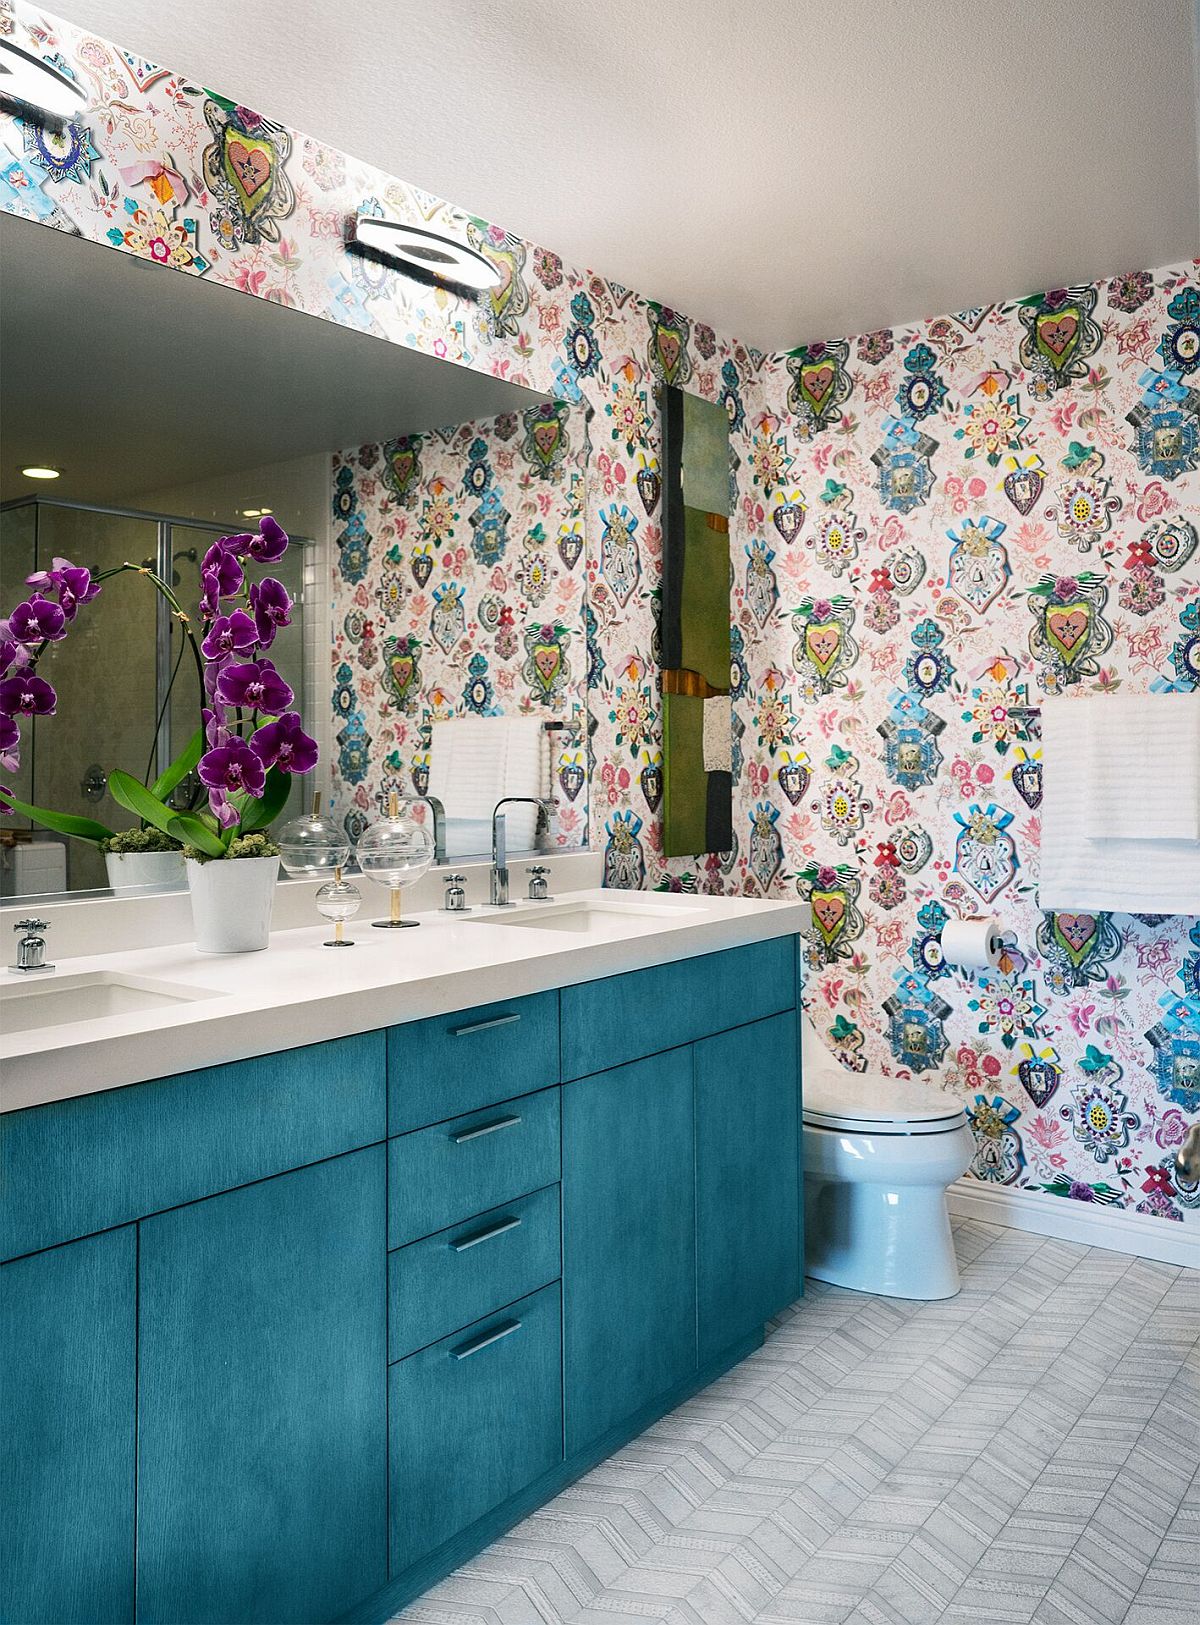 Unique-shade-of-blue-for-the-bathroom-vanity-coupled-with-lively-wallpapered-backdrop-46176